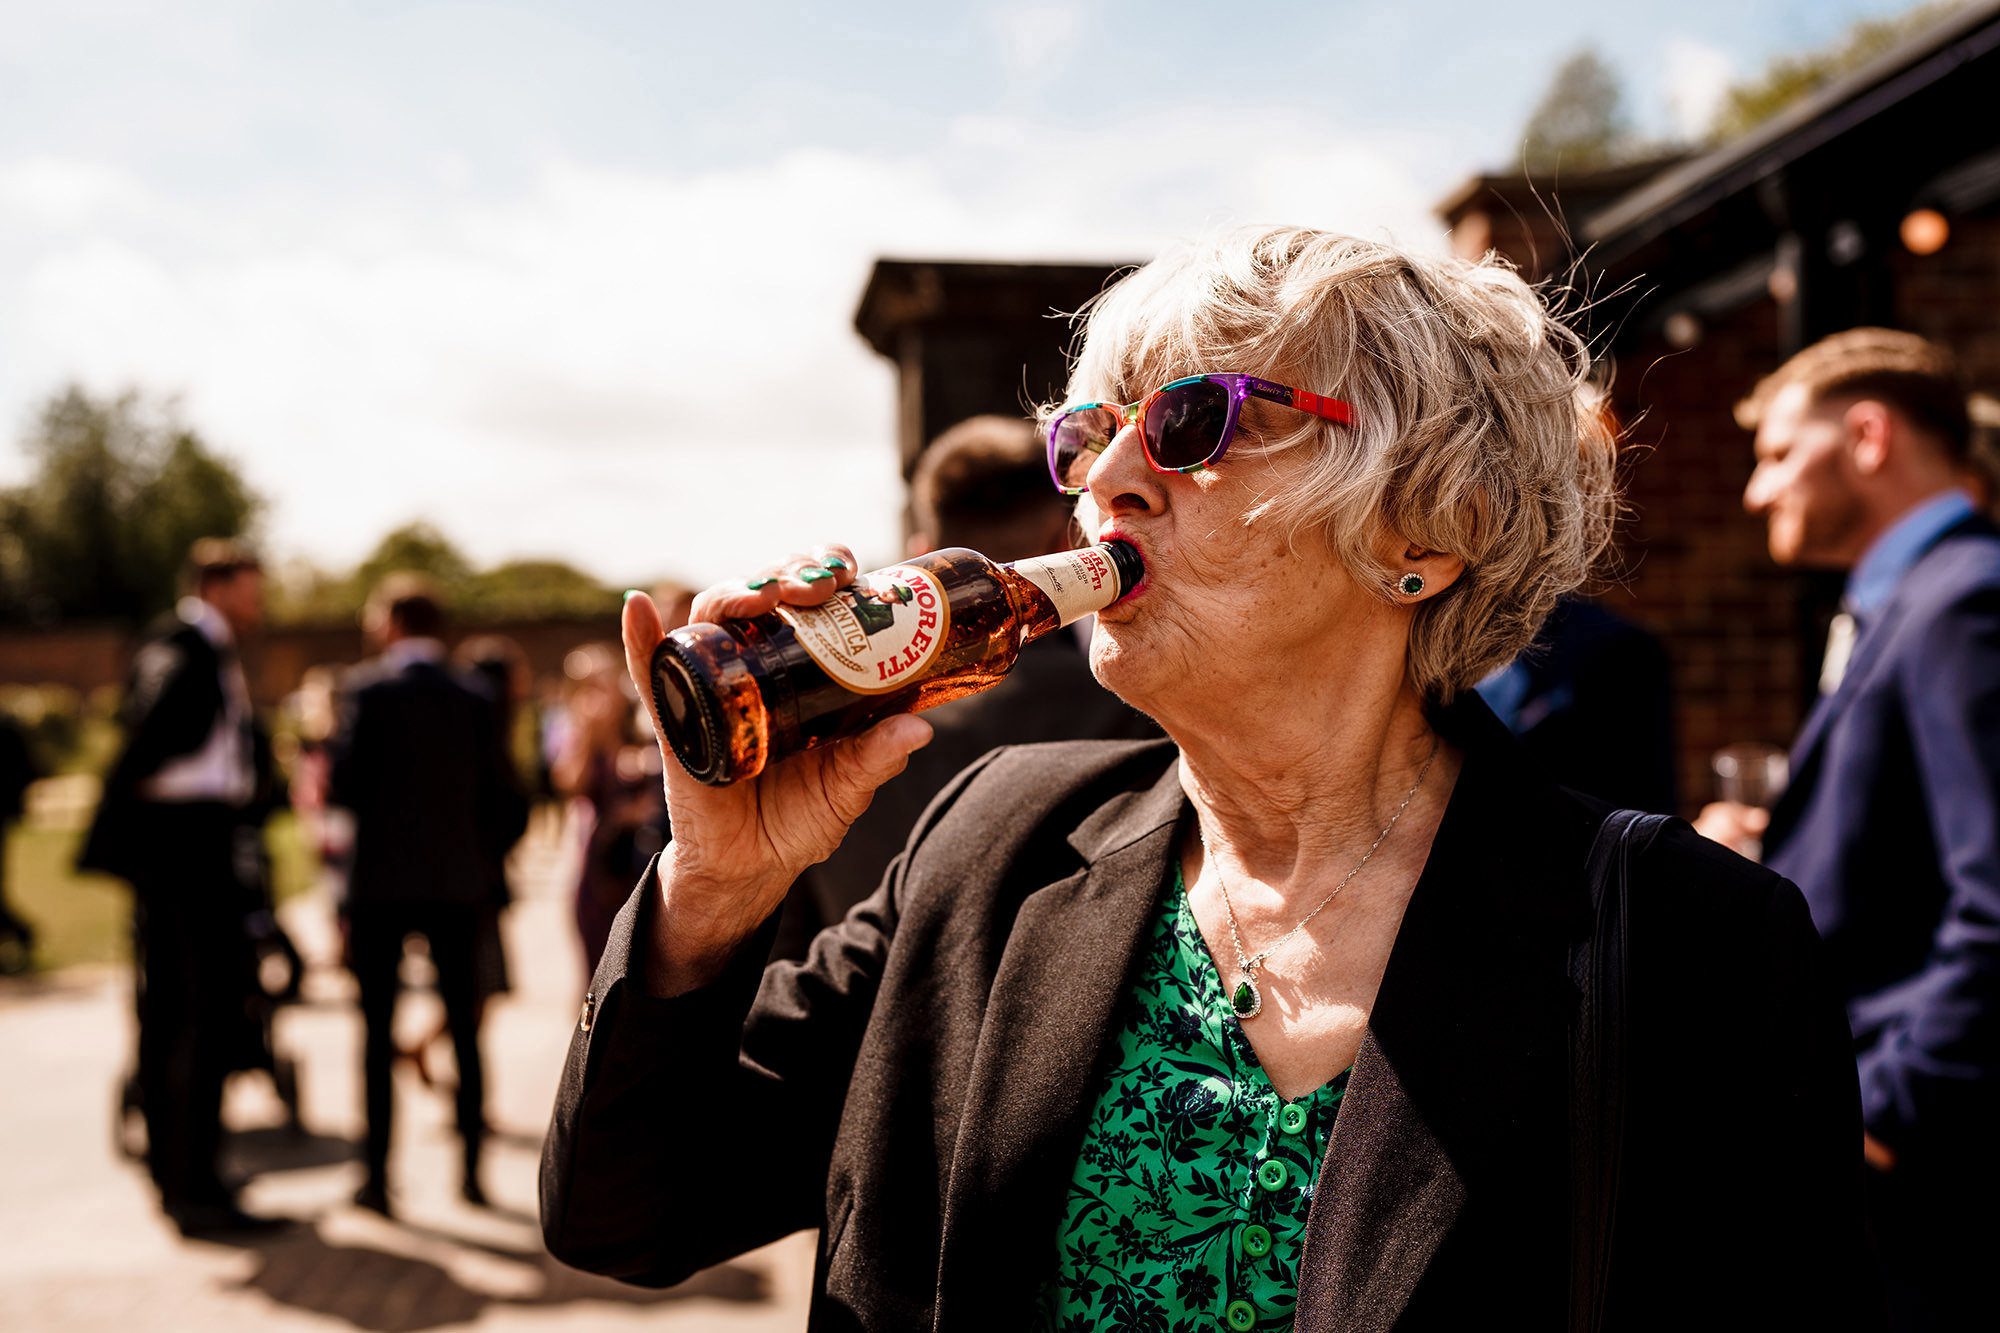 wedding guest drinks a beer in the London sunshine